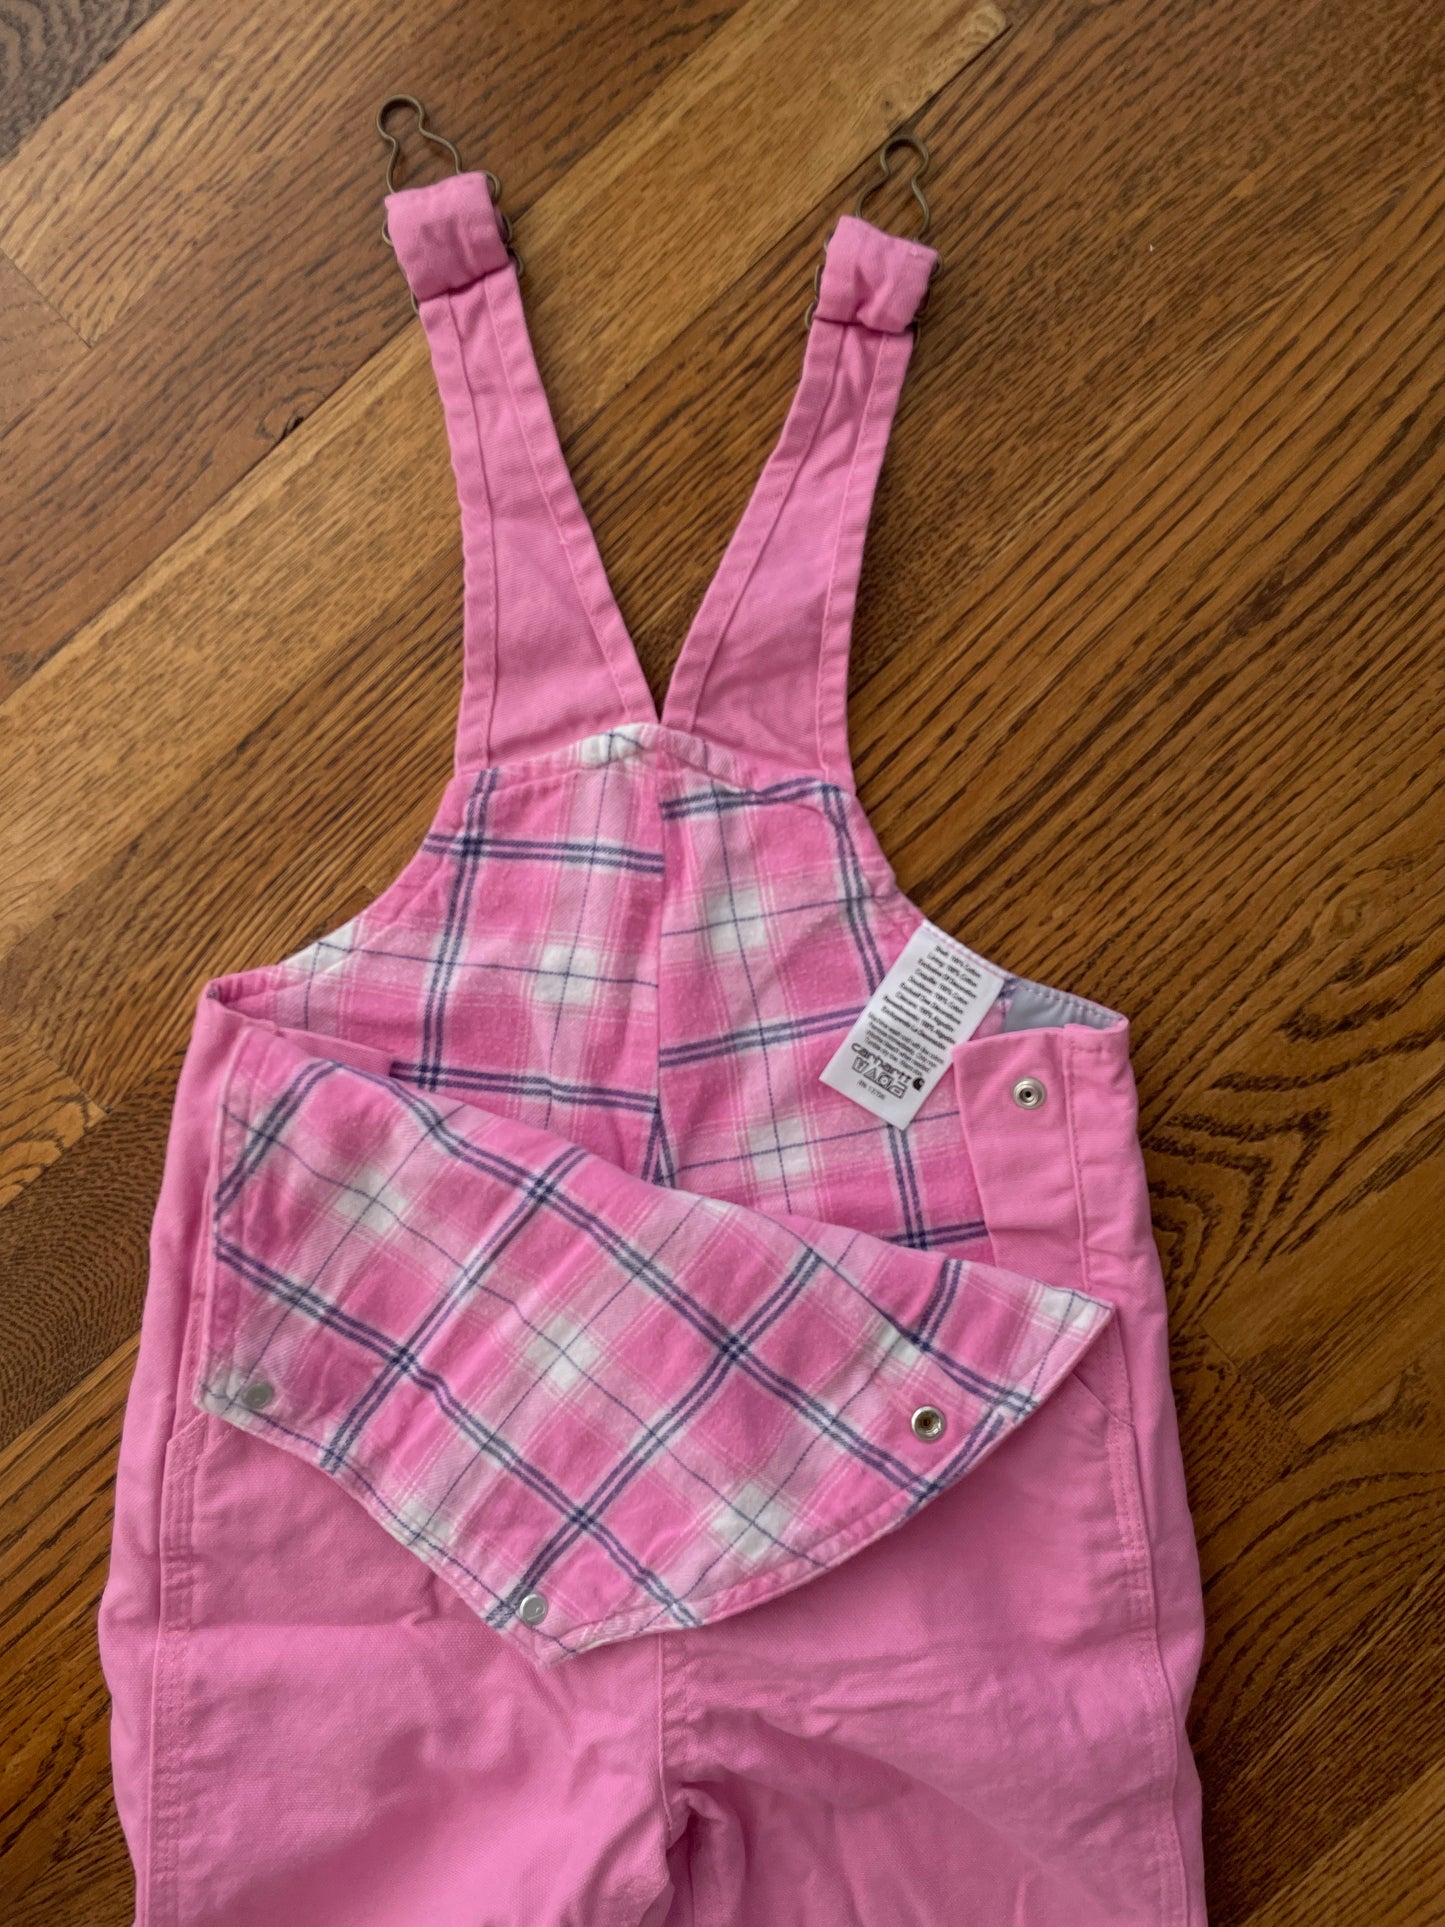 Girls 2T, Carhartt, Pink Fannel Lined Overalls